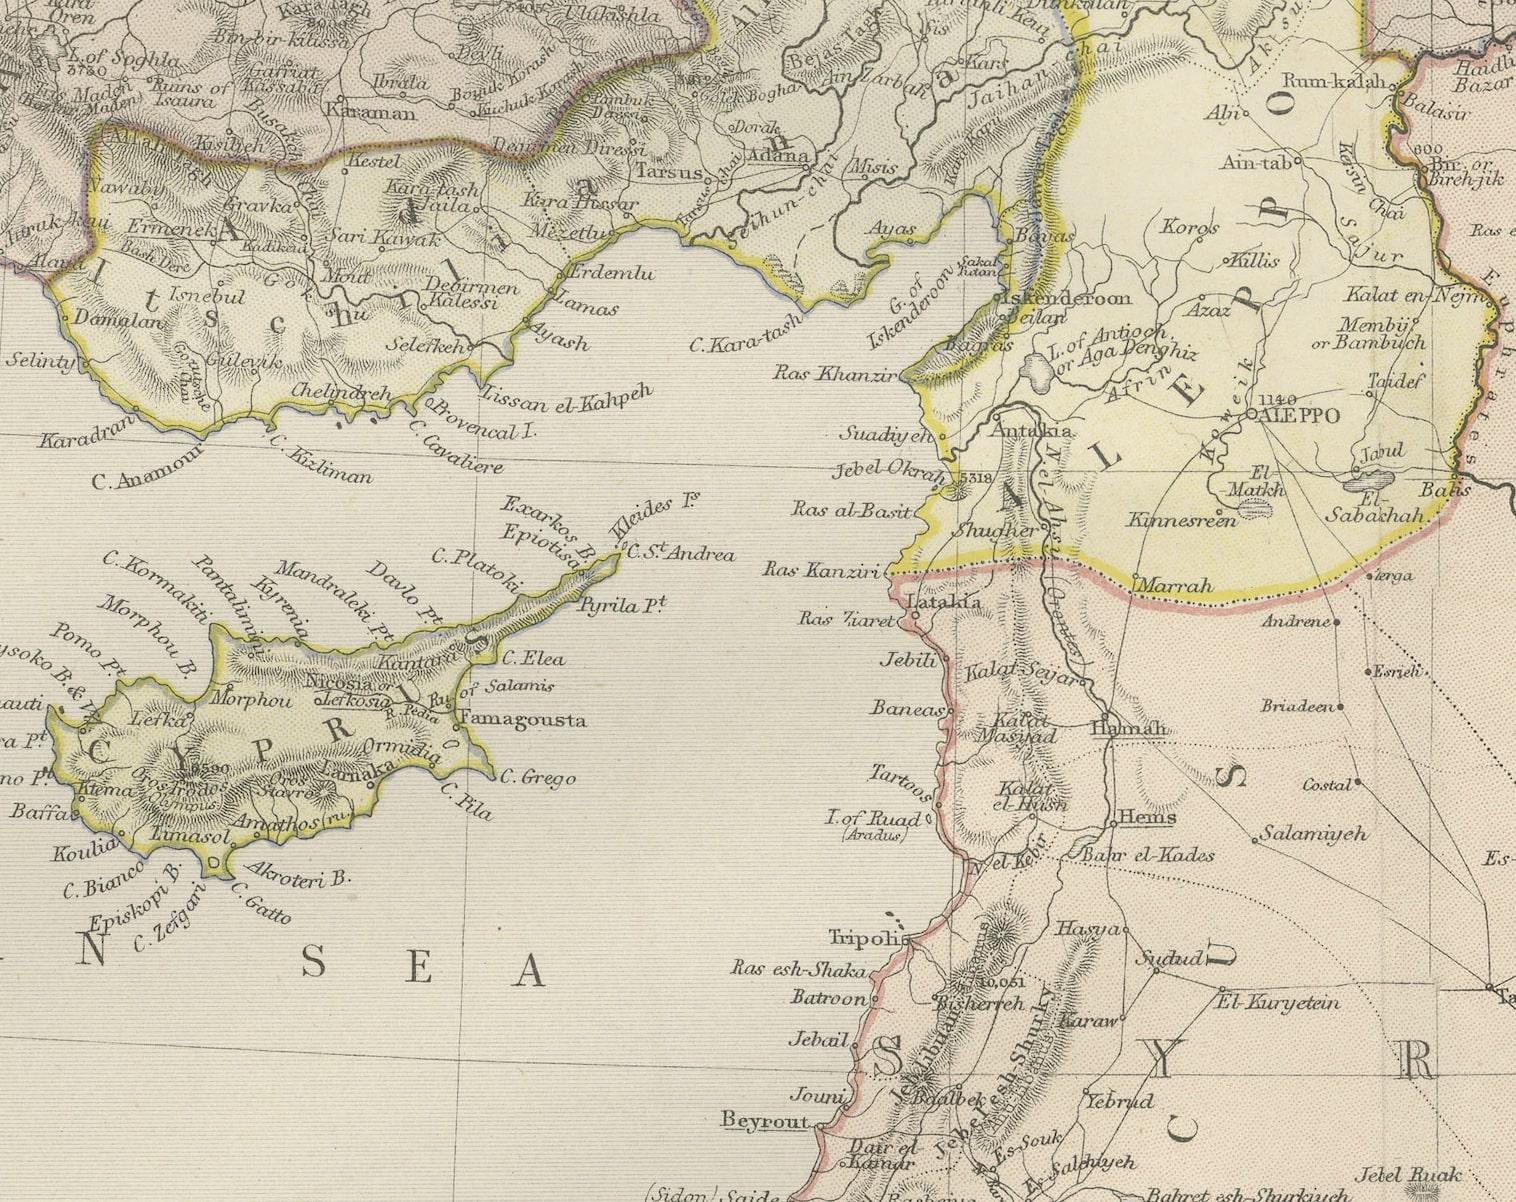 Late 19th Century Empire's Crossroads: An 1882 Map of Turkey in Asia by Blackie & Son For Sale